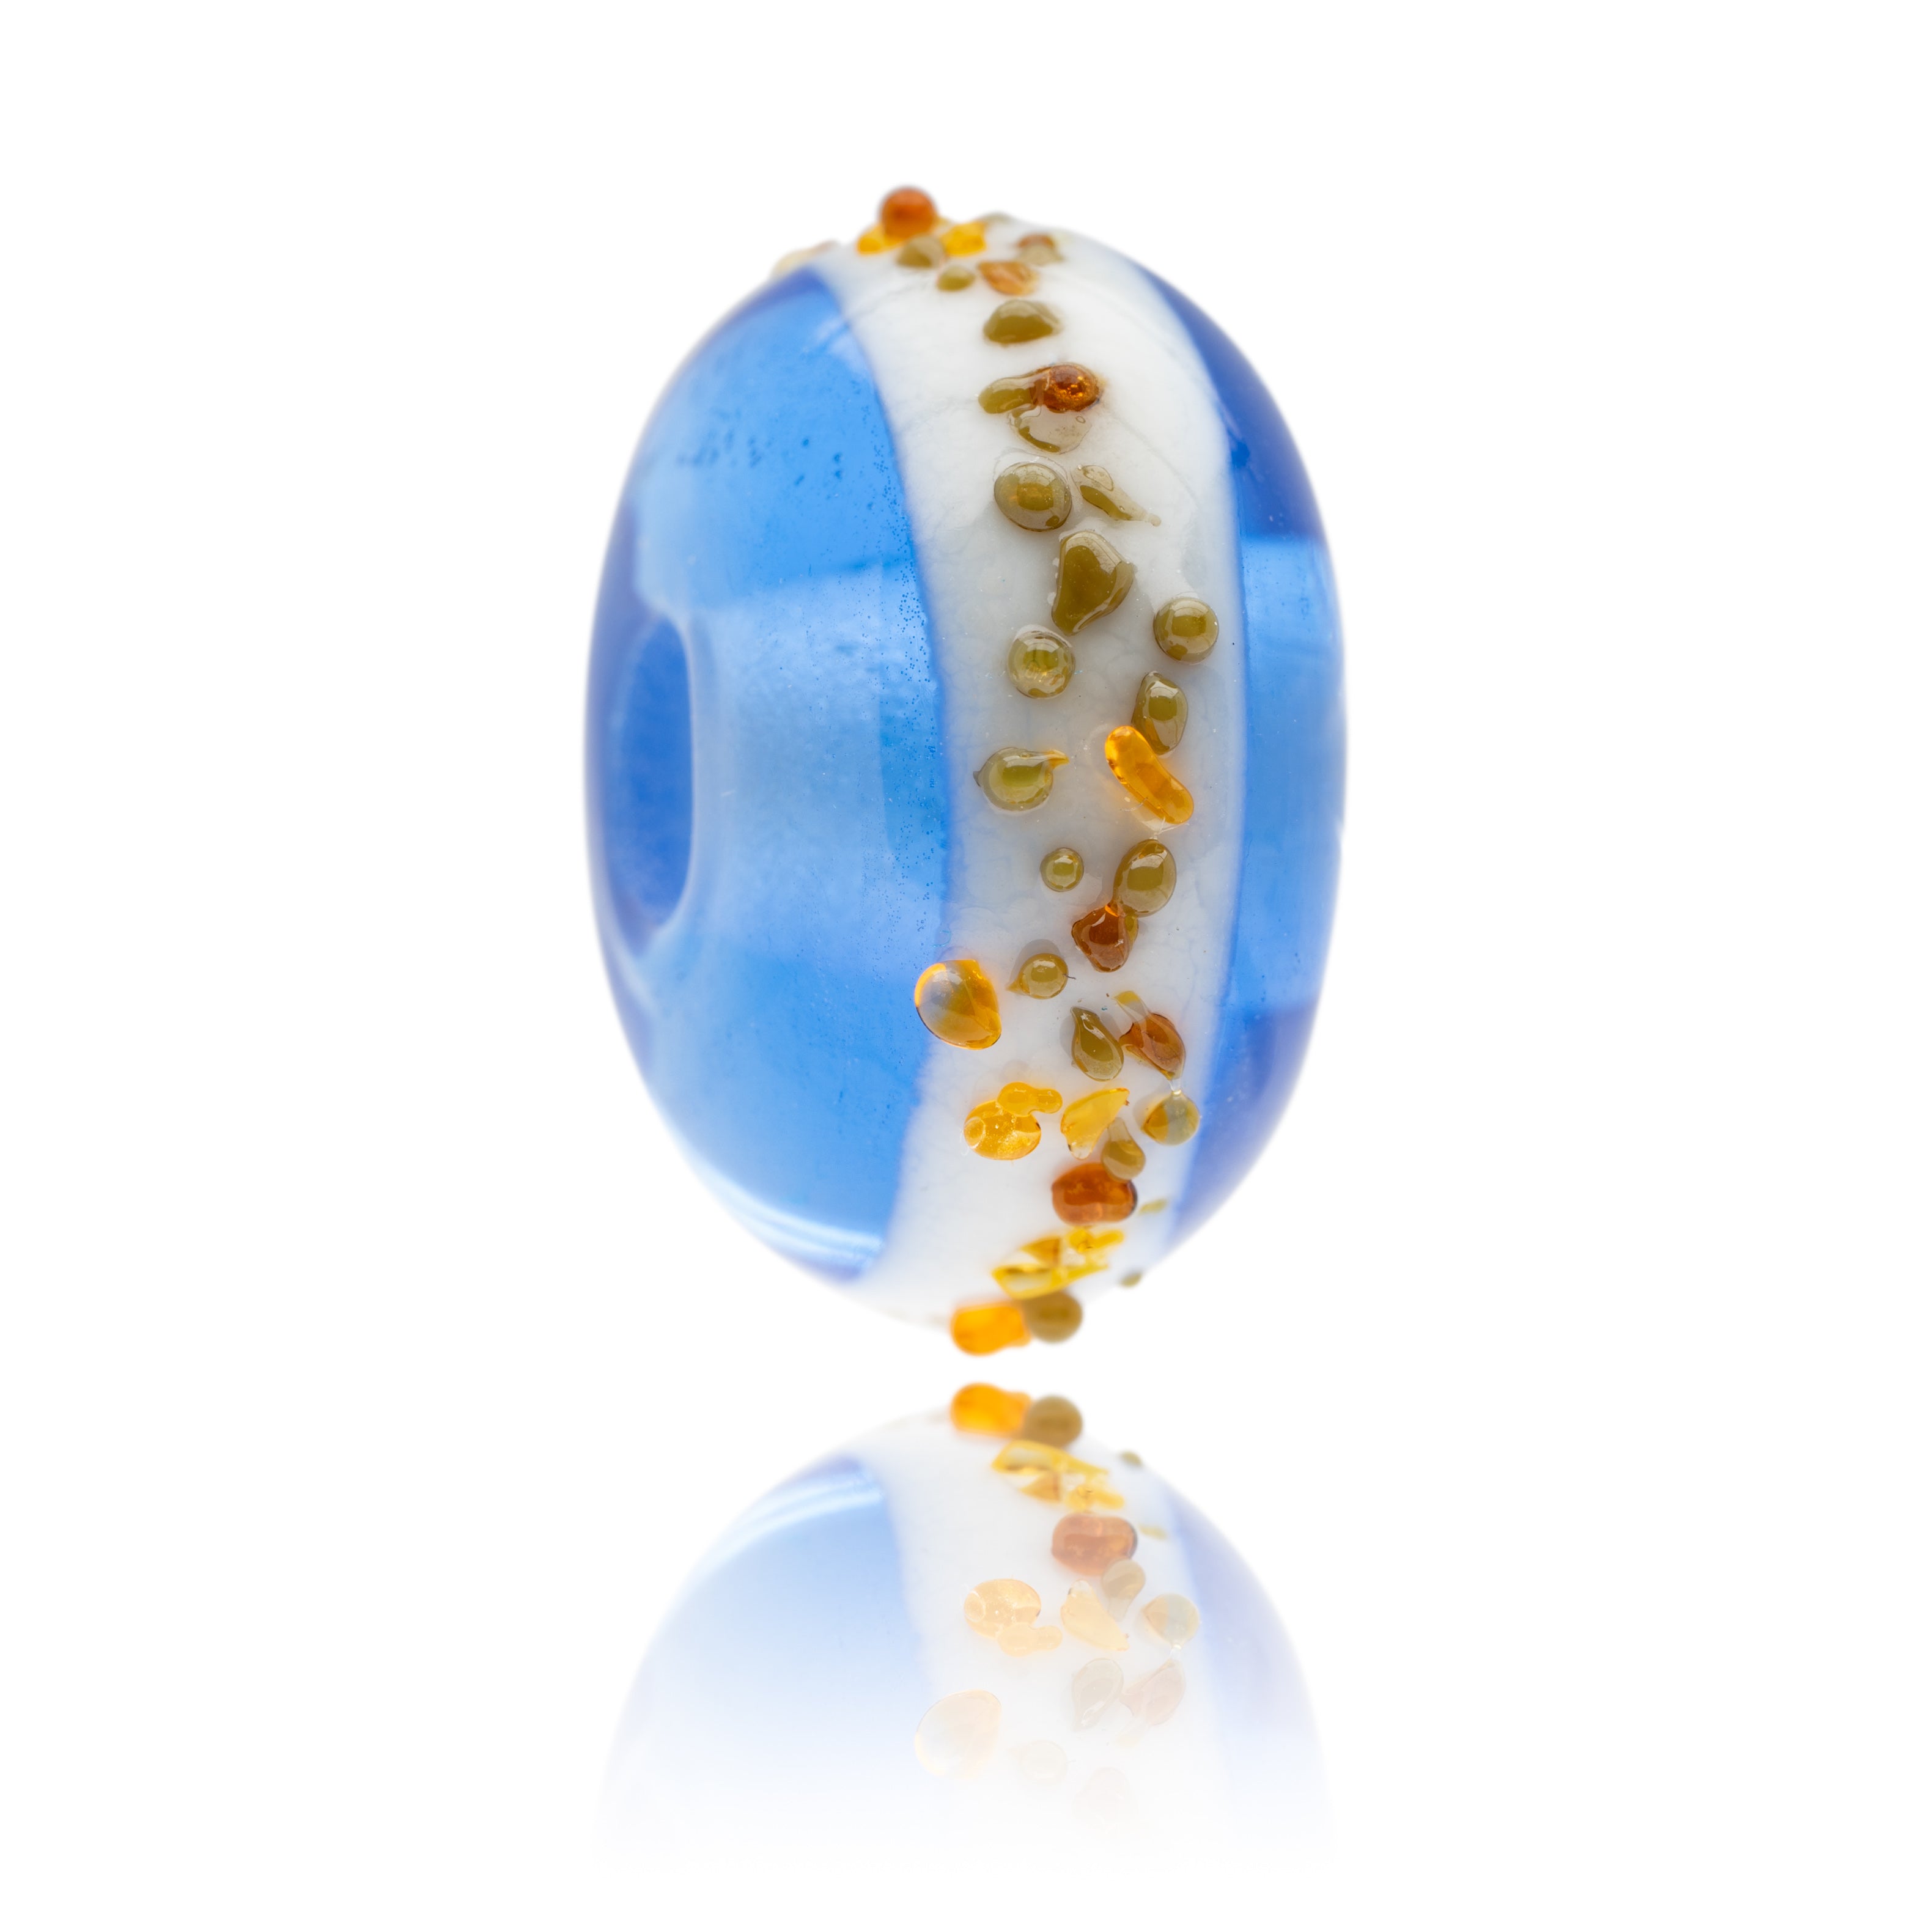 Blue glass surf bead with white stripe and amber glass shard decoration representing Druridge Bay in Northumberland.